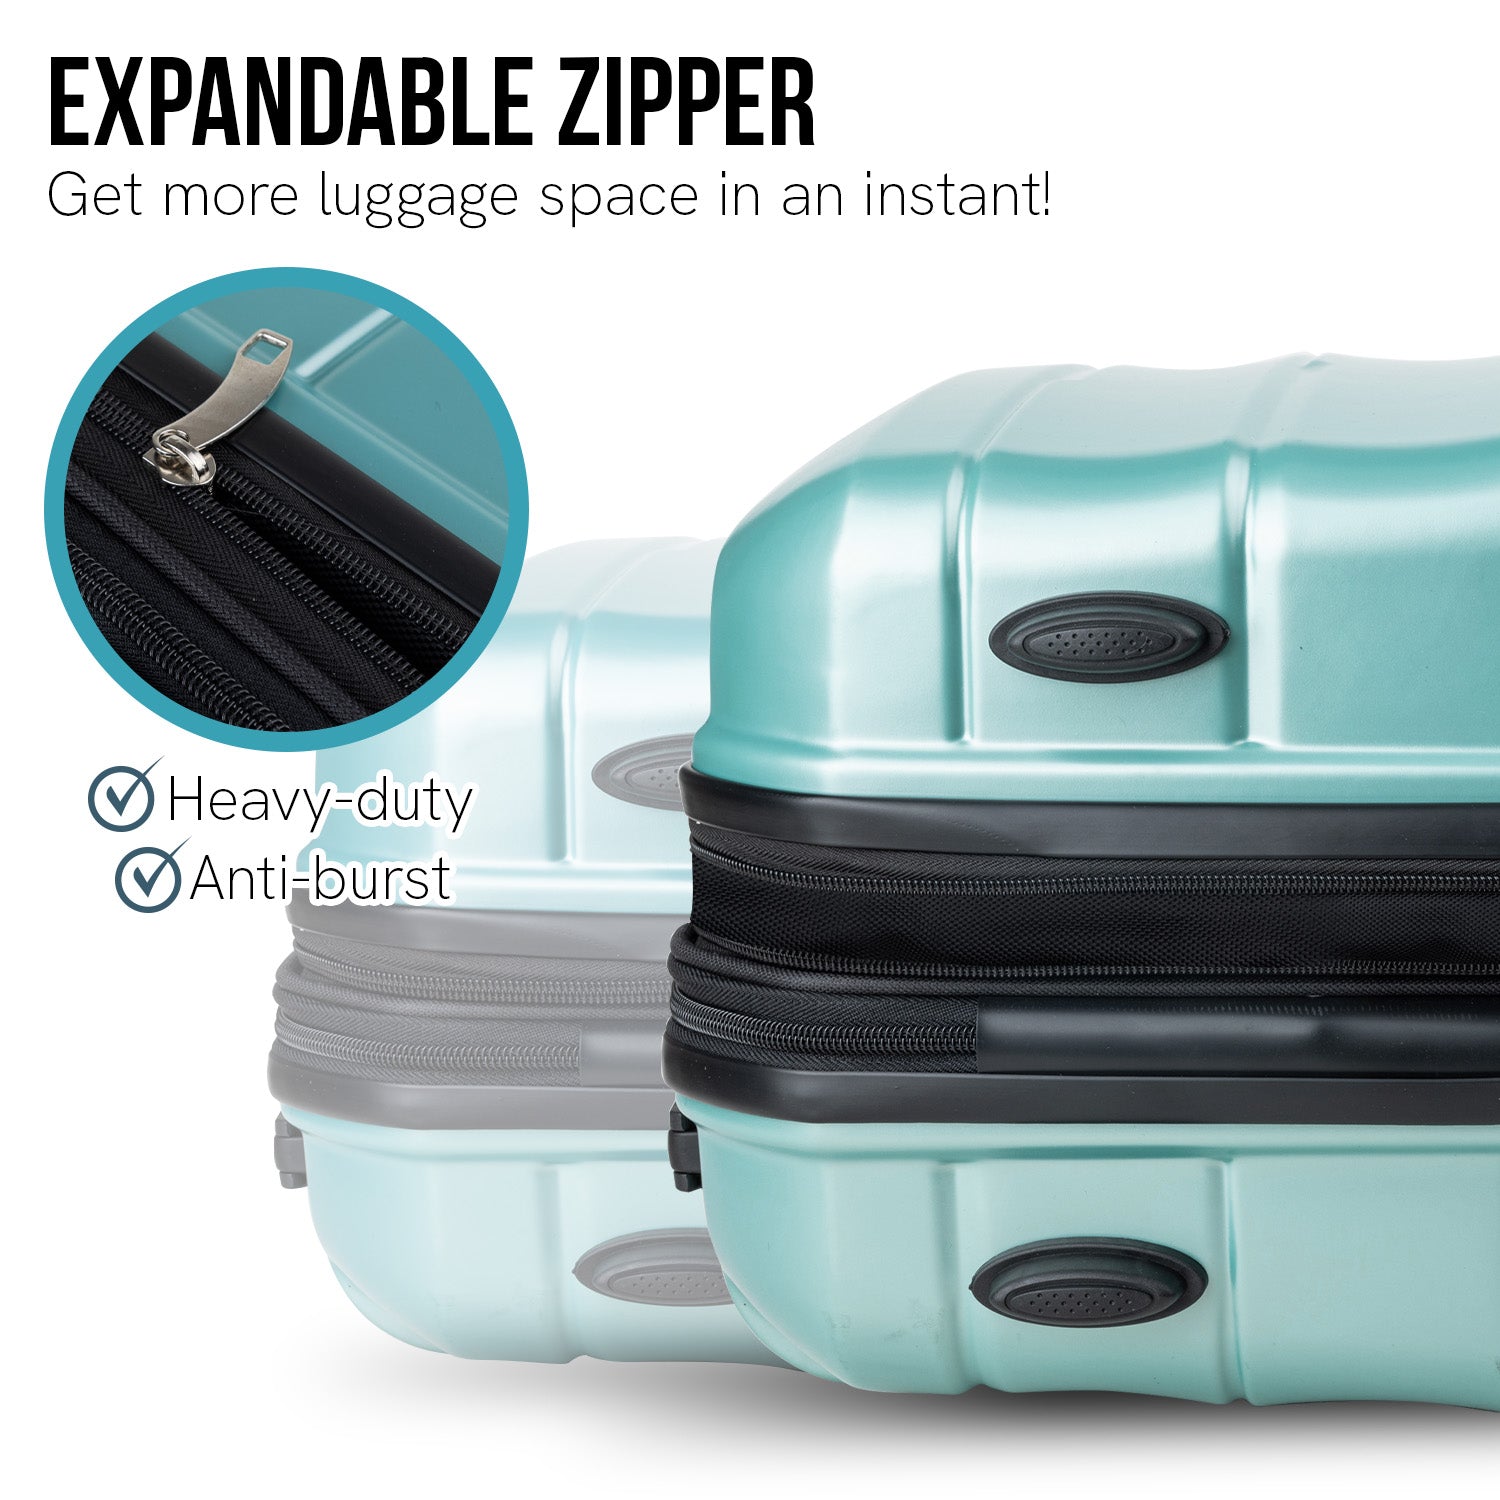 Olympus Artemis 28in Hard Shell Suitcase ABS+PC - Electric Teal-Home &amp; Garden-PEROZ Accessories